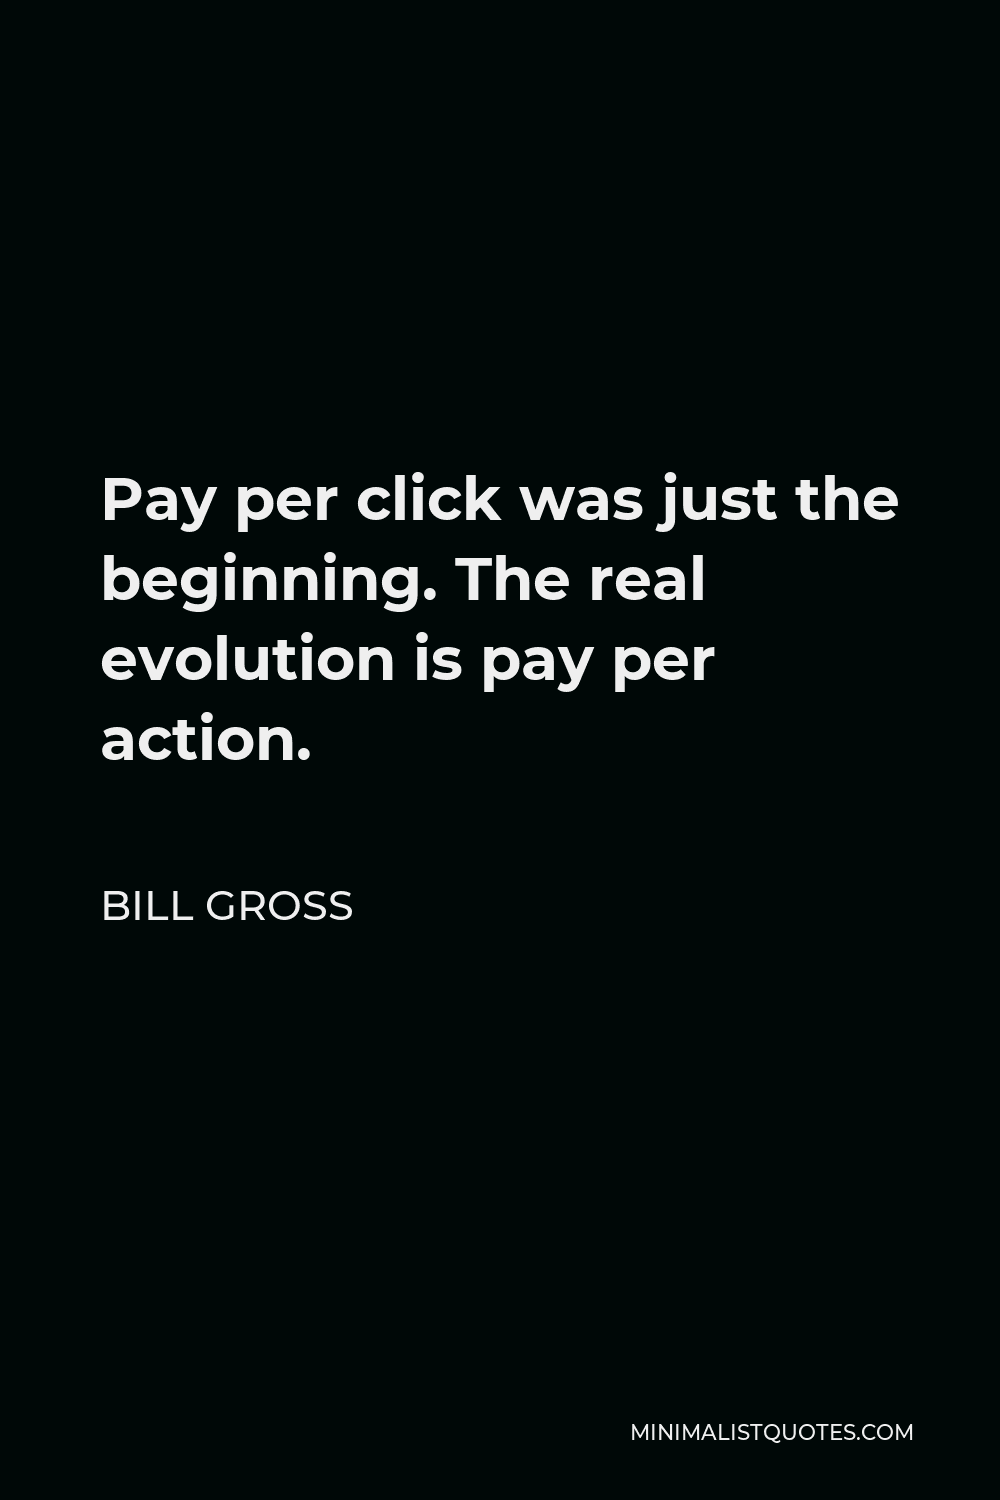 Bill Gross Quote - Pay per click was just the beginning. The real evolution is pay per action.